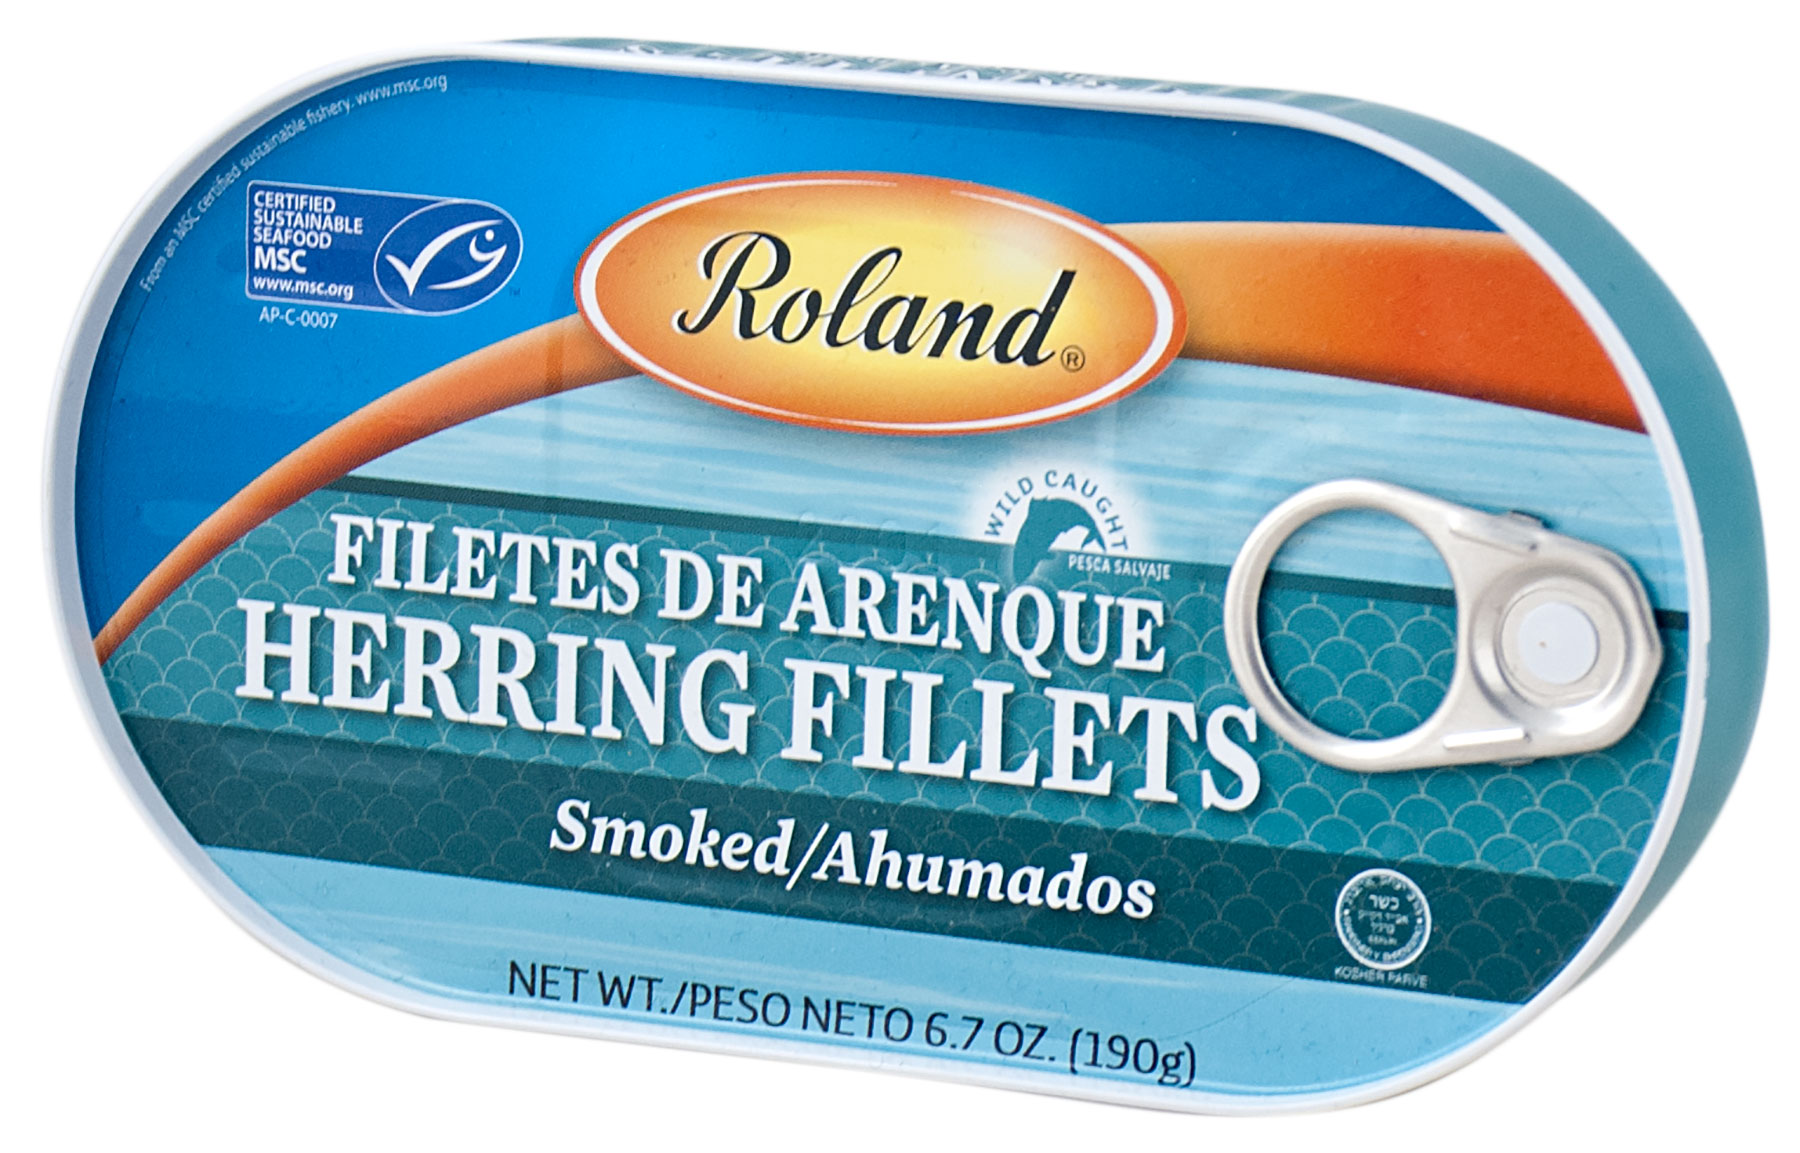 Roland Smoked Herring Fillets, 6.7 Oz - image 1 of 1